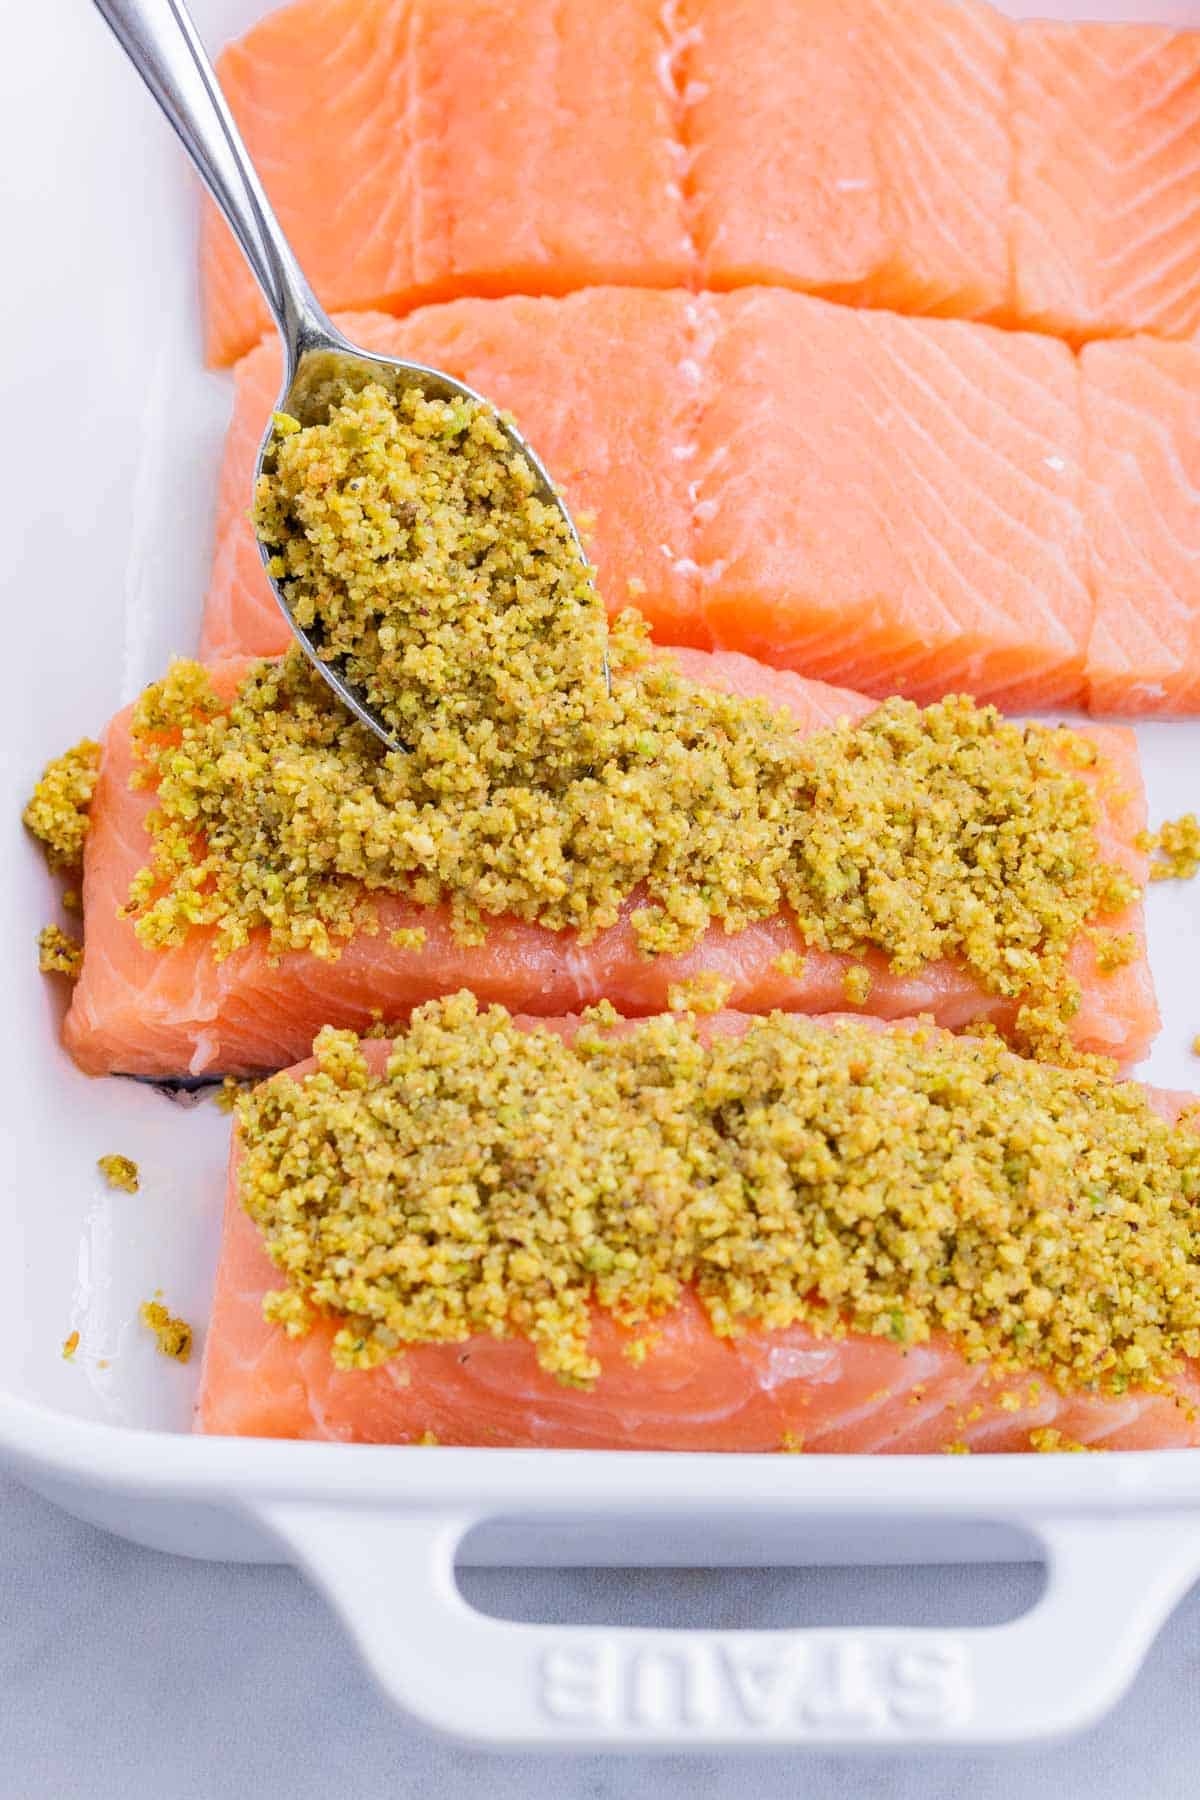 The pistachio is spooned on top of the salmon filets.